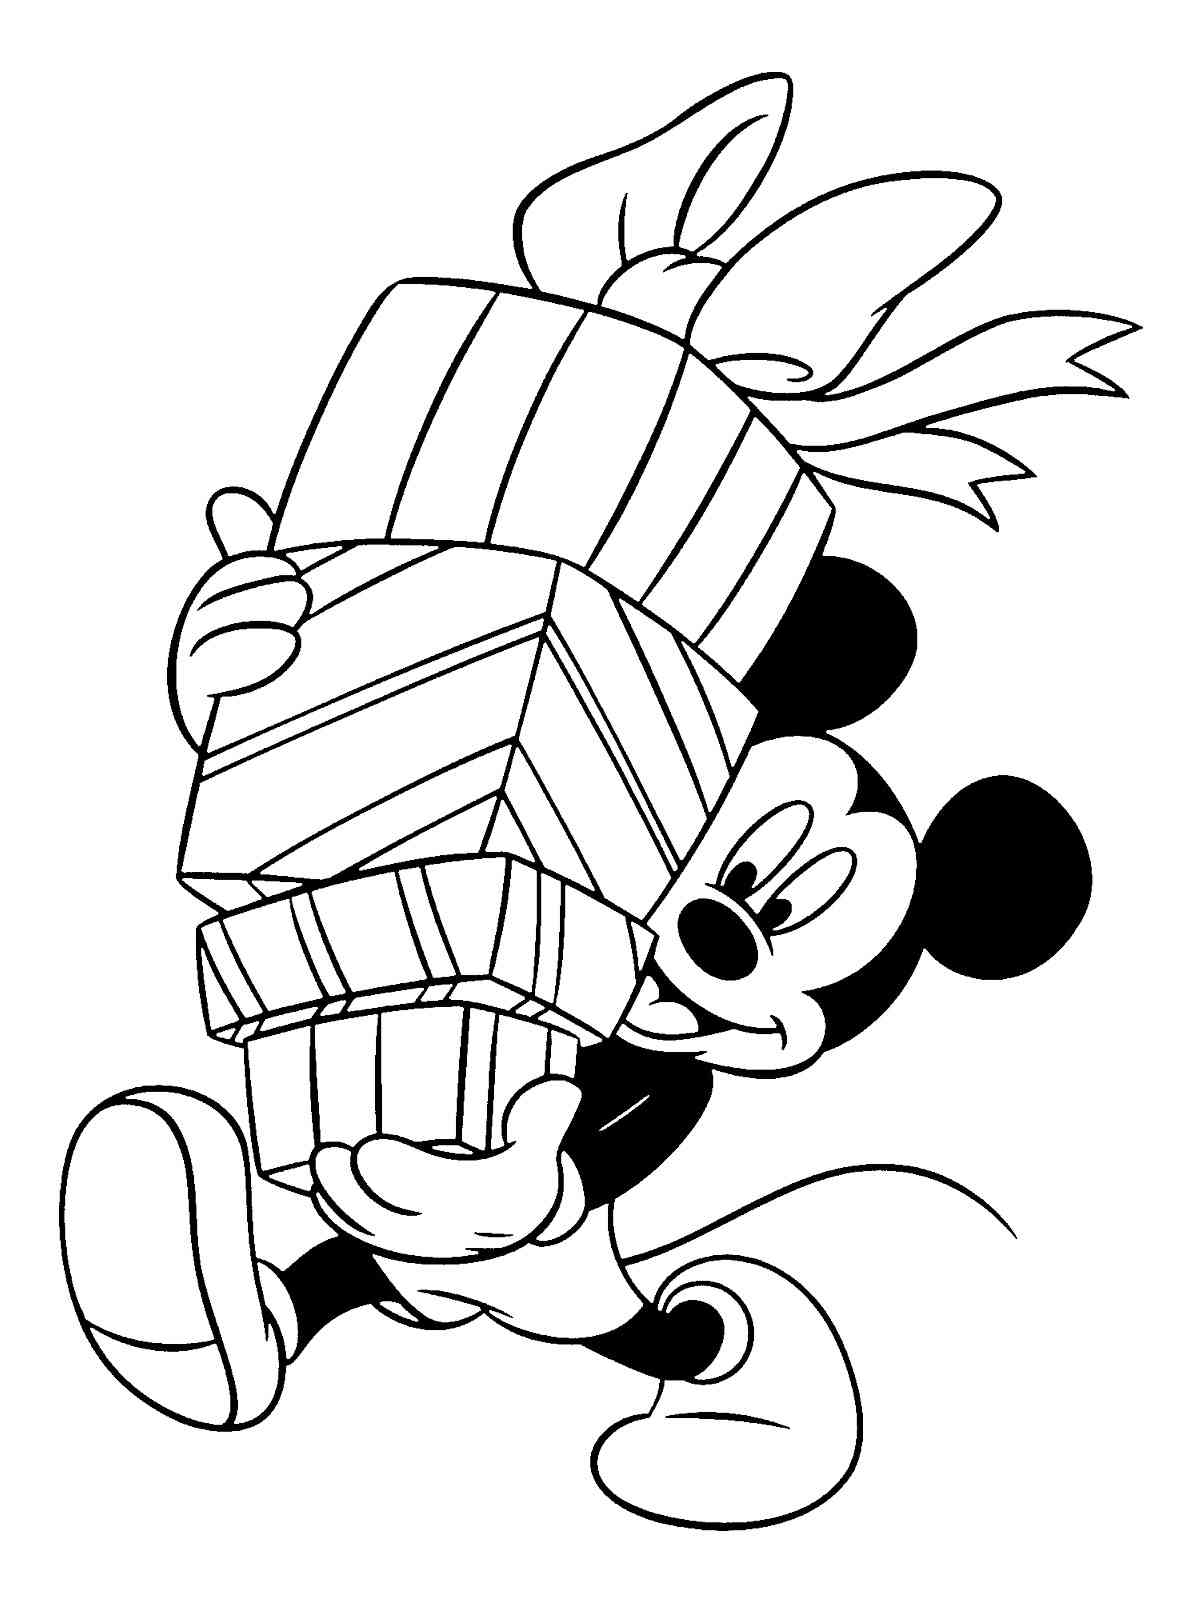 Disney Christmas 17 coloring page